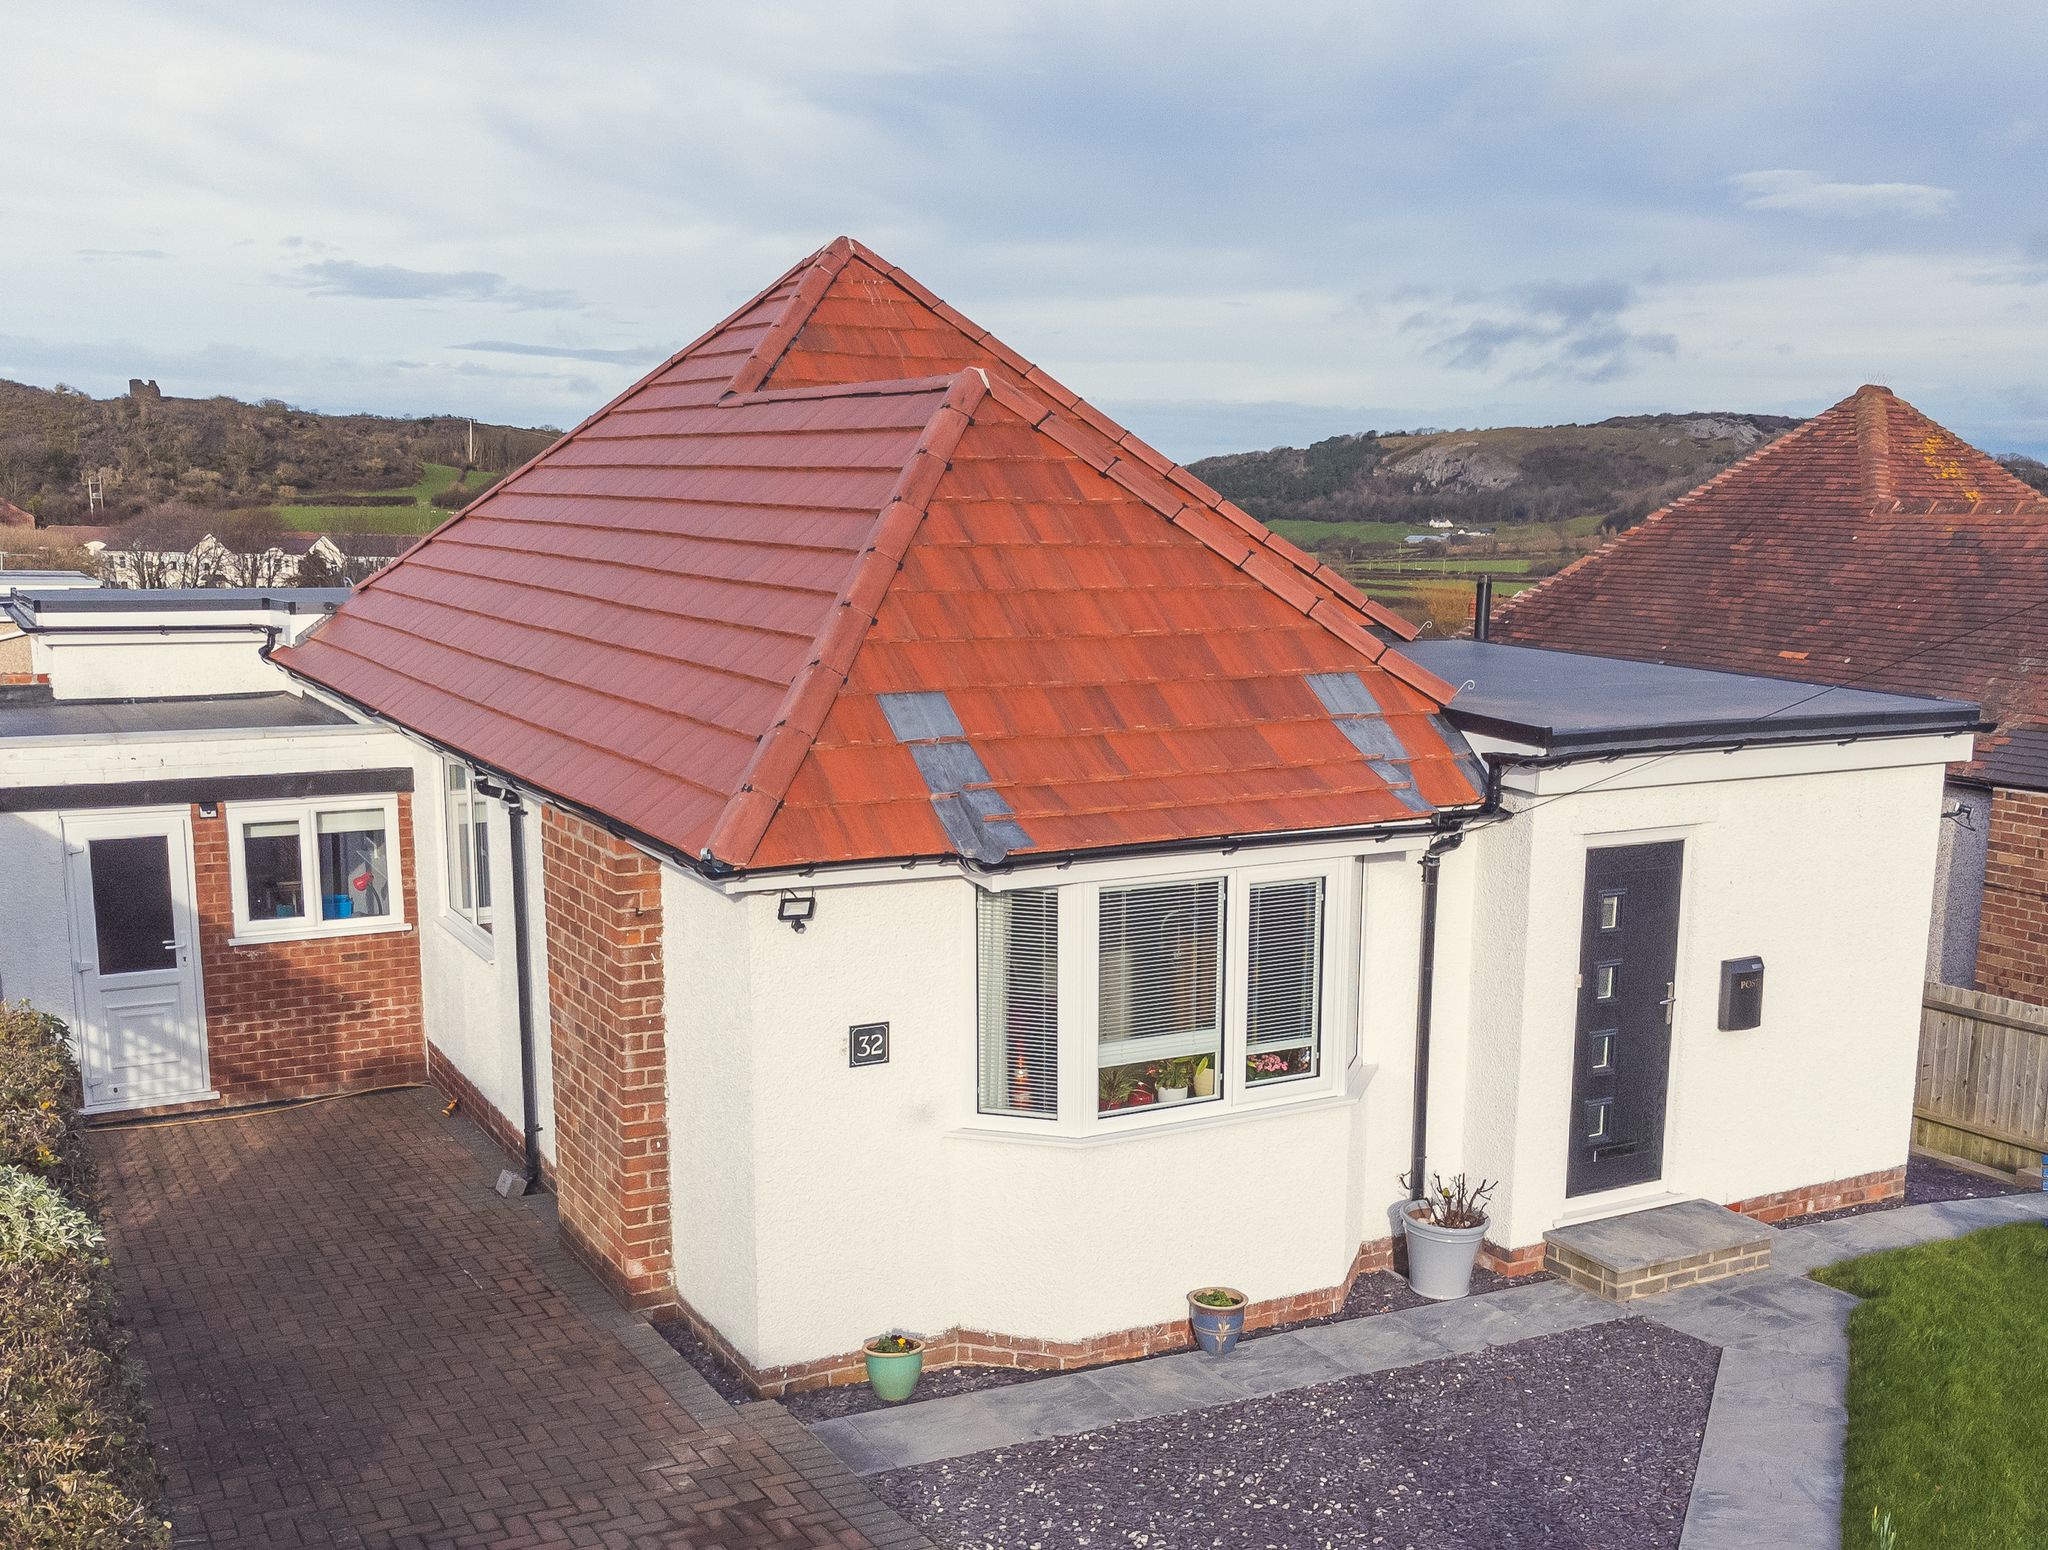 Tile Roof Contractors Llanfair Talhaiarn, LL22 - DD Roofing